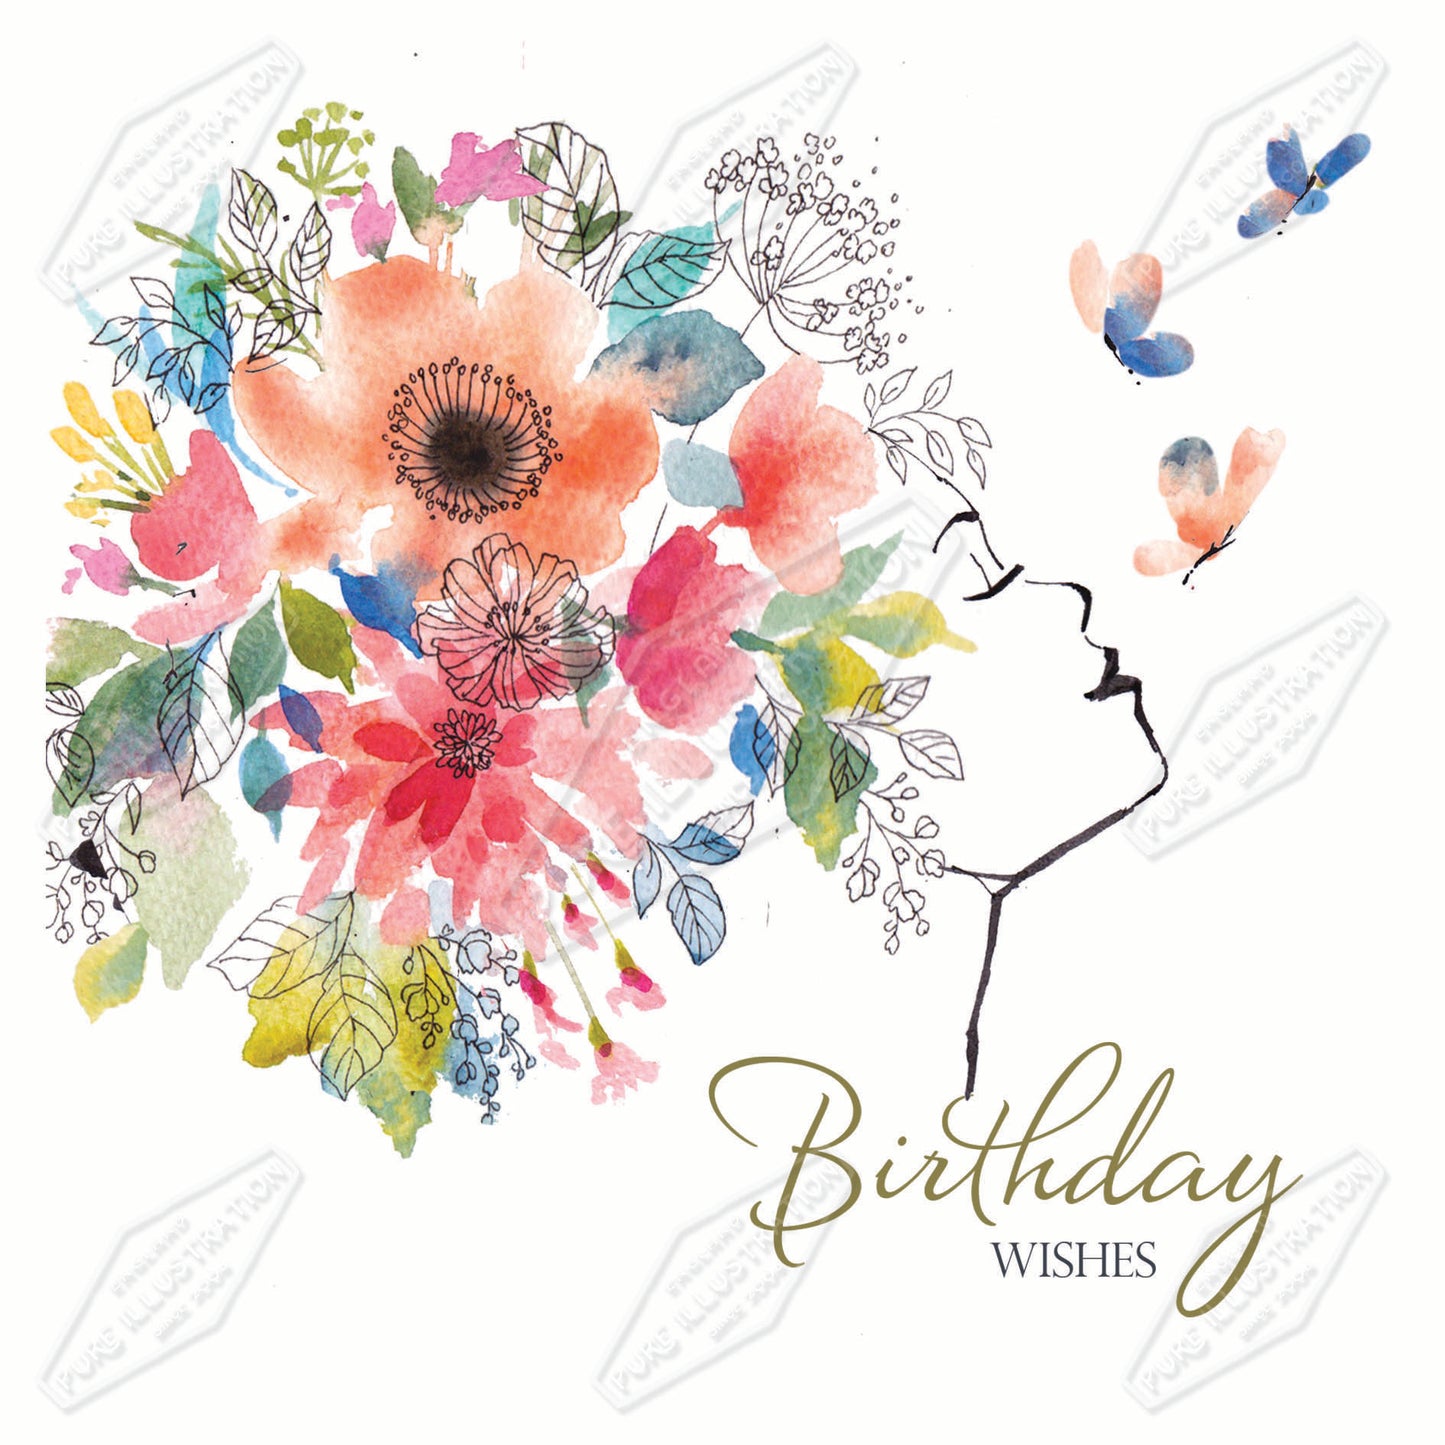 00035817AMA - Ally Marie is represented by Pure Art Licensing Agency - Birthday Greeting Card Design